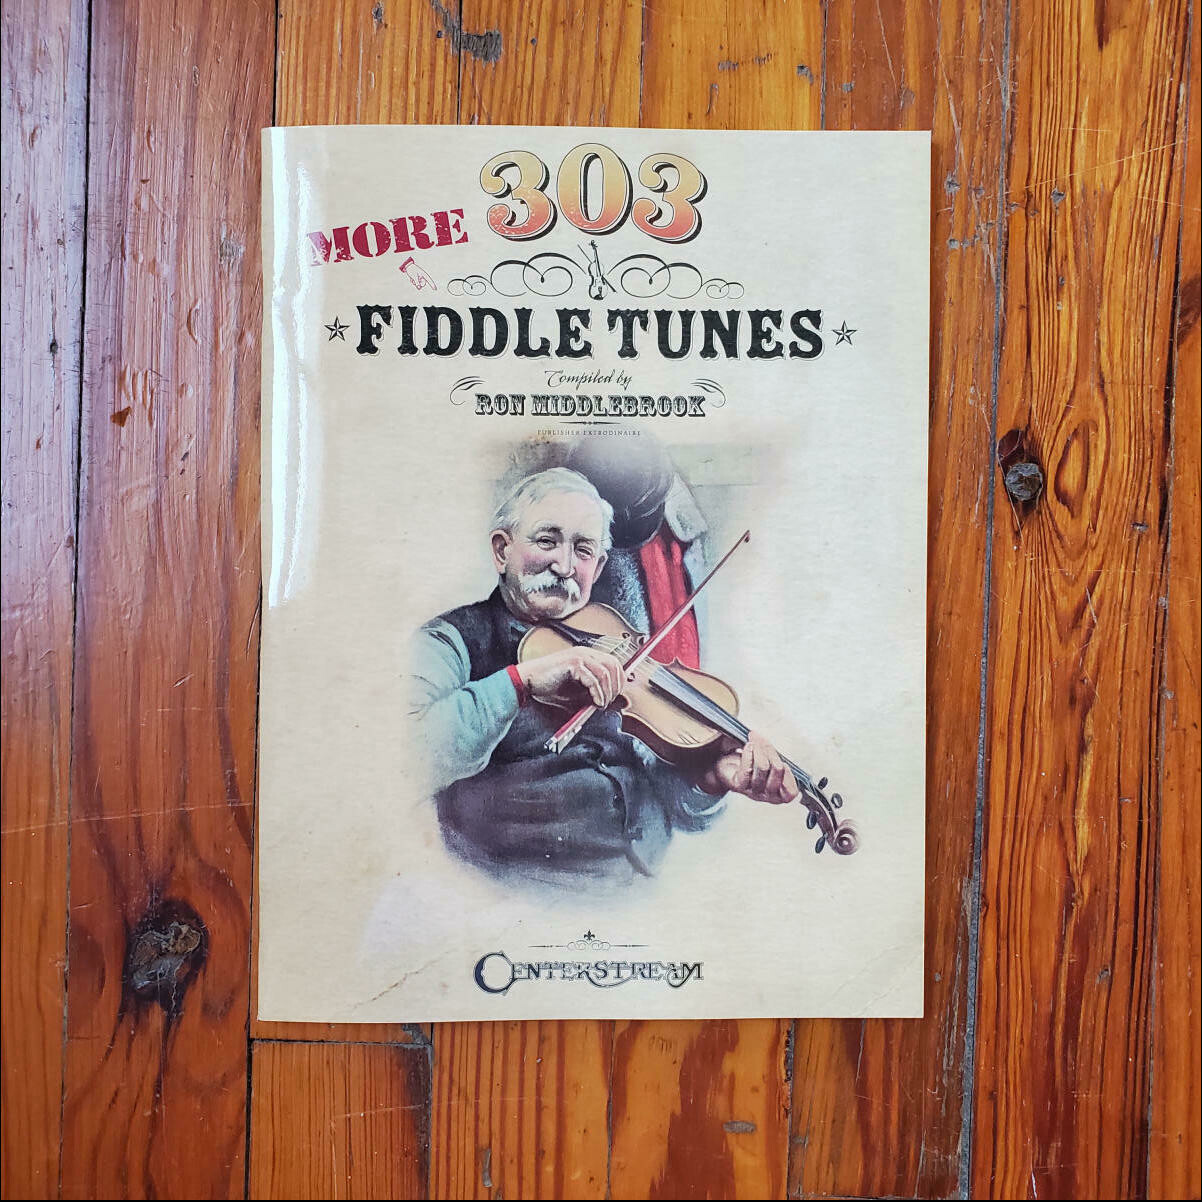 HL 303 More Fiddle Tunes by: Ron Middlebrook